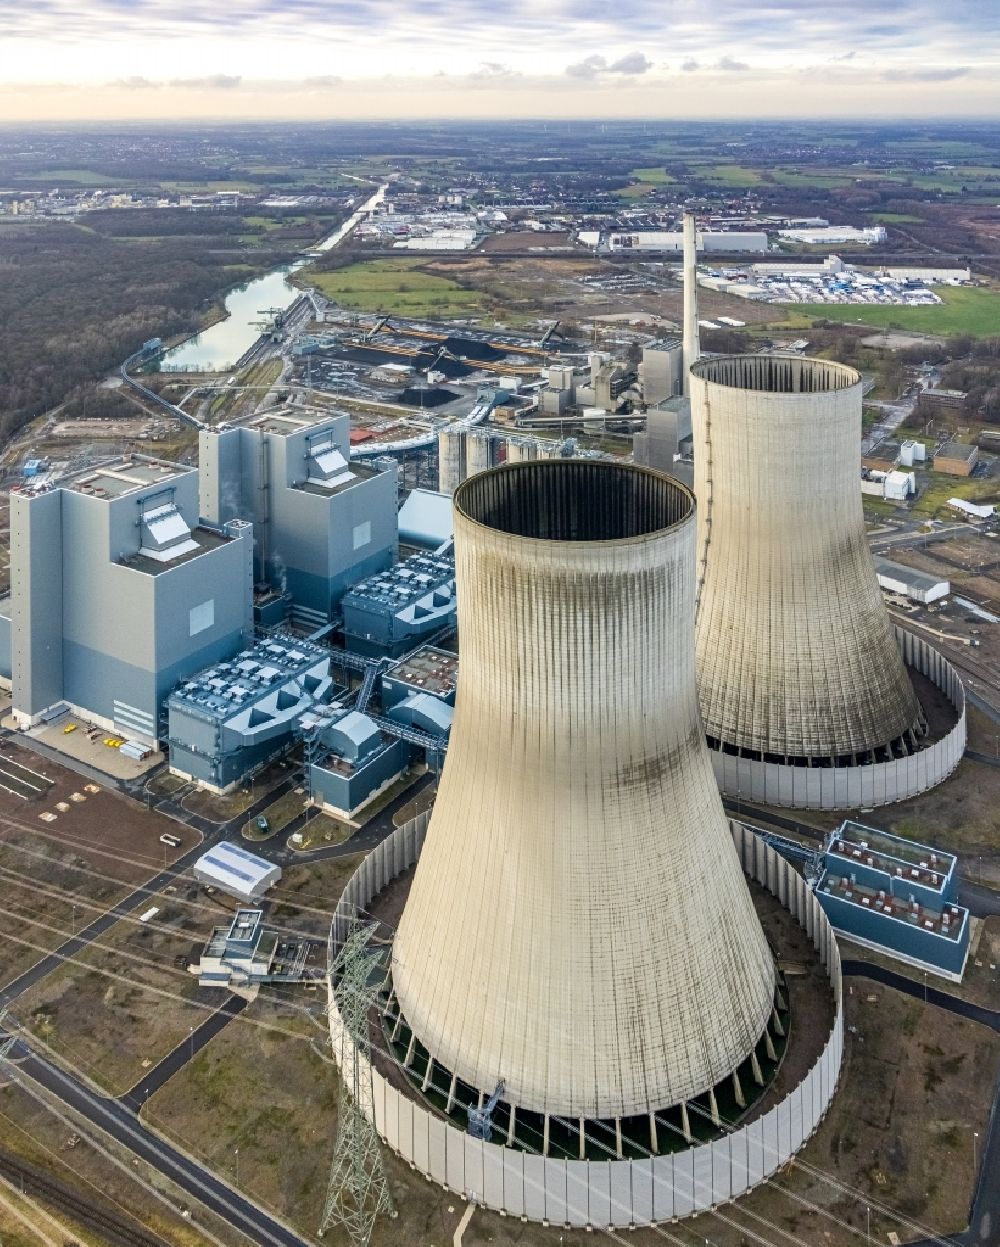 Aerial photograph Hamm - Power plants and exhaust towers of coal thermal power station of RWE Power in the Schmehausen part of Hamm in the state of North Rhine-Westphalia